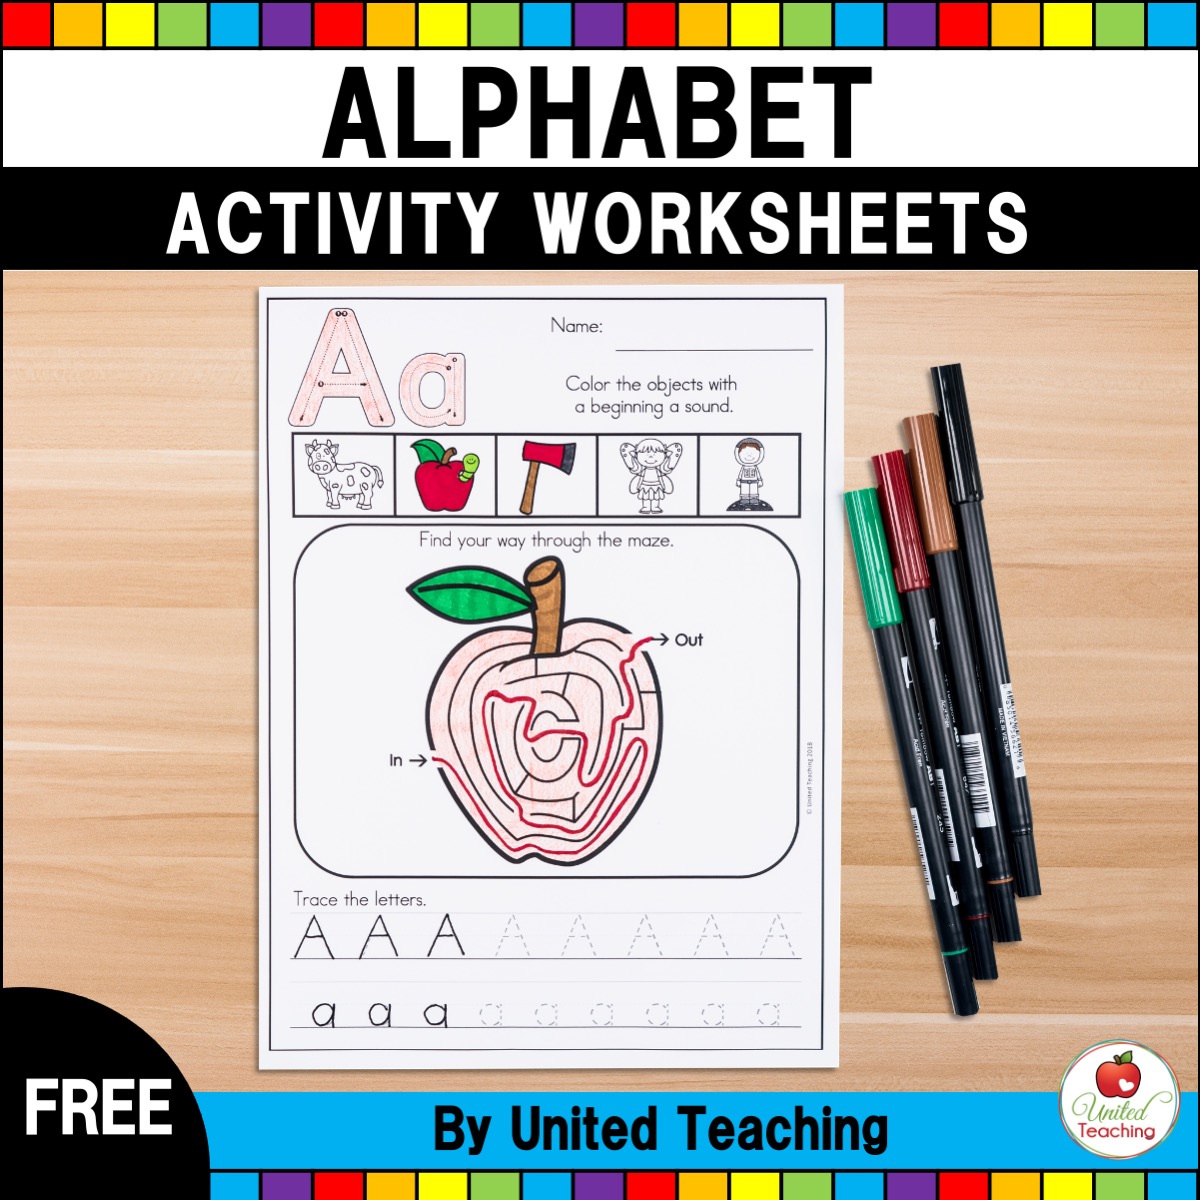 Alphabet Activity Worksheets Cover Page